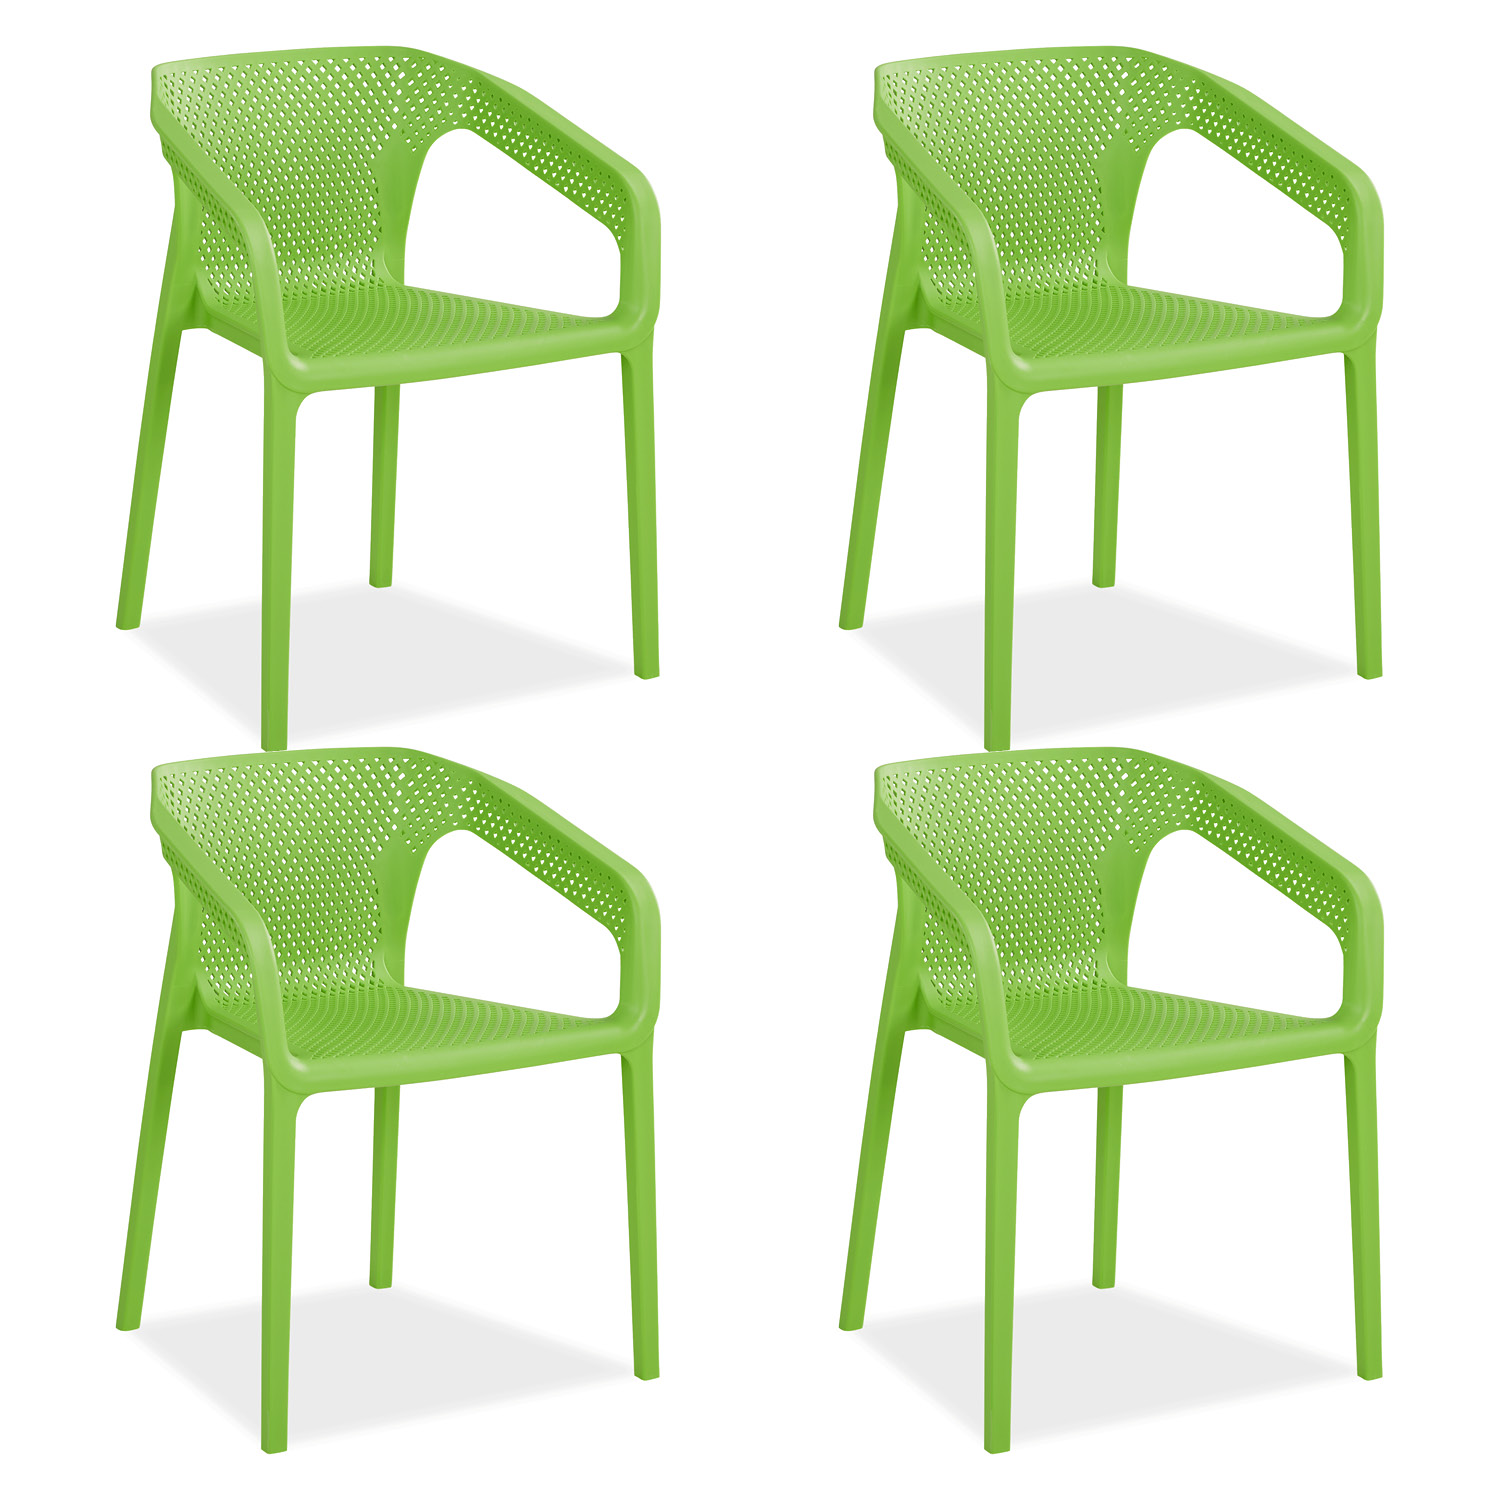 Set of 4 Garden chair with armrests Camping chairs Green Outdoor chairs Plastic Egg chair Lounger chairs Stacking chairs